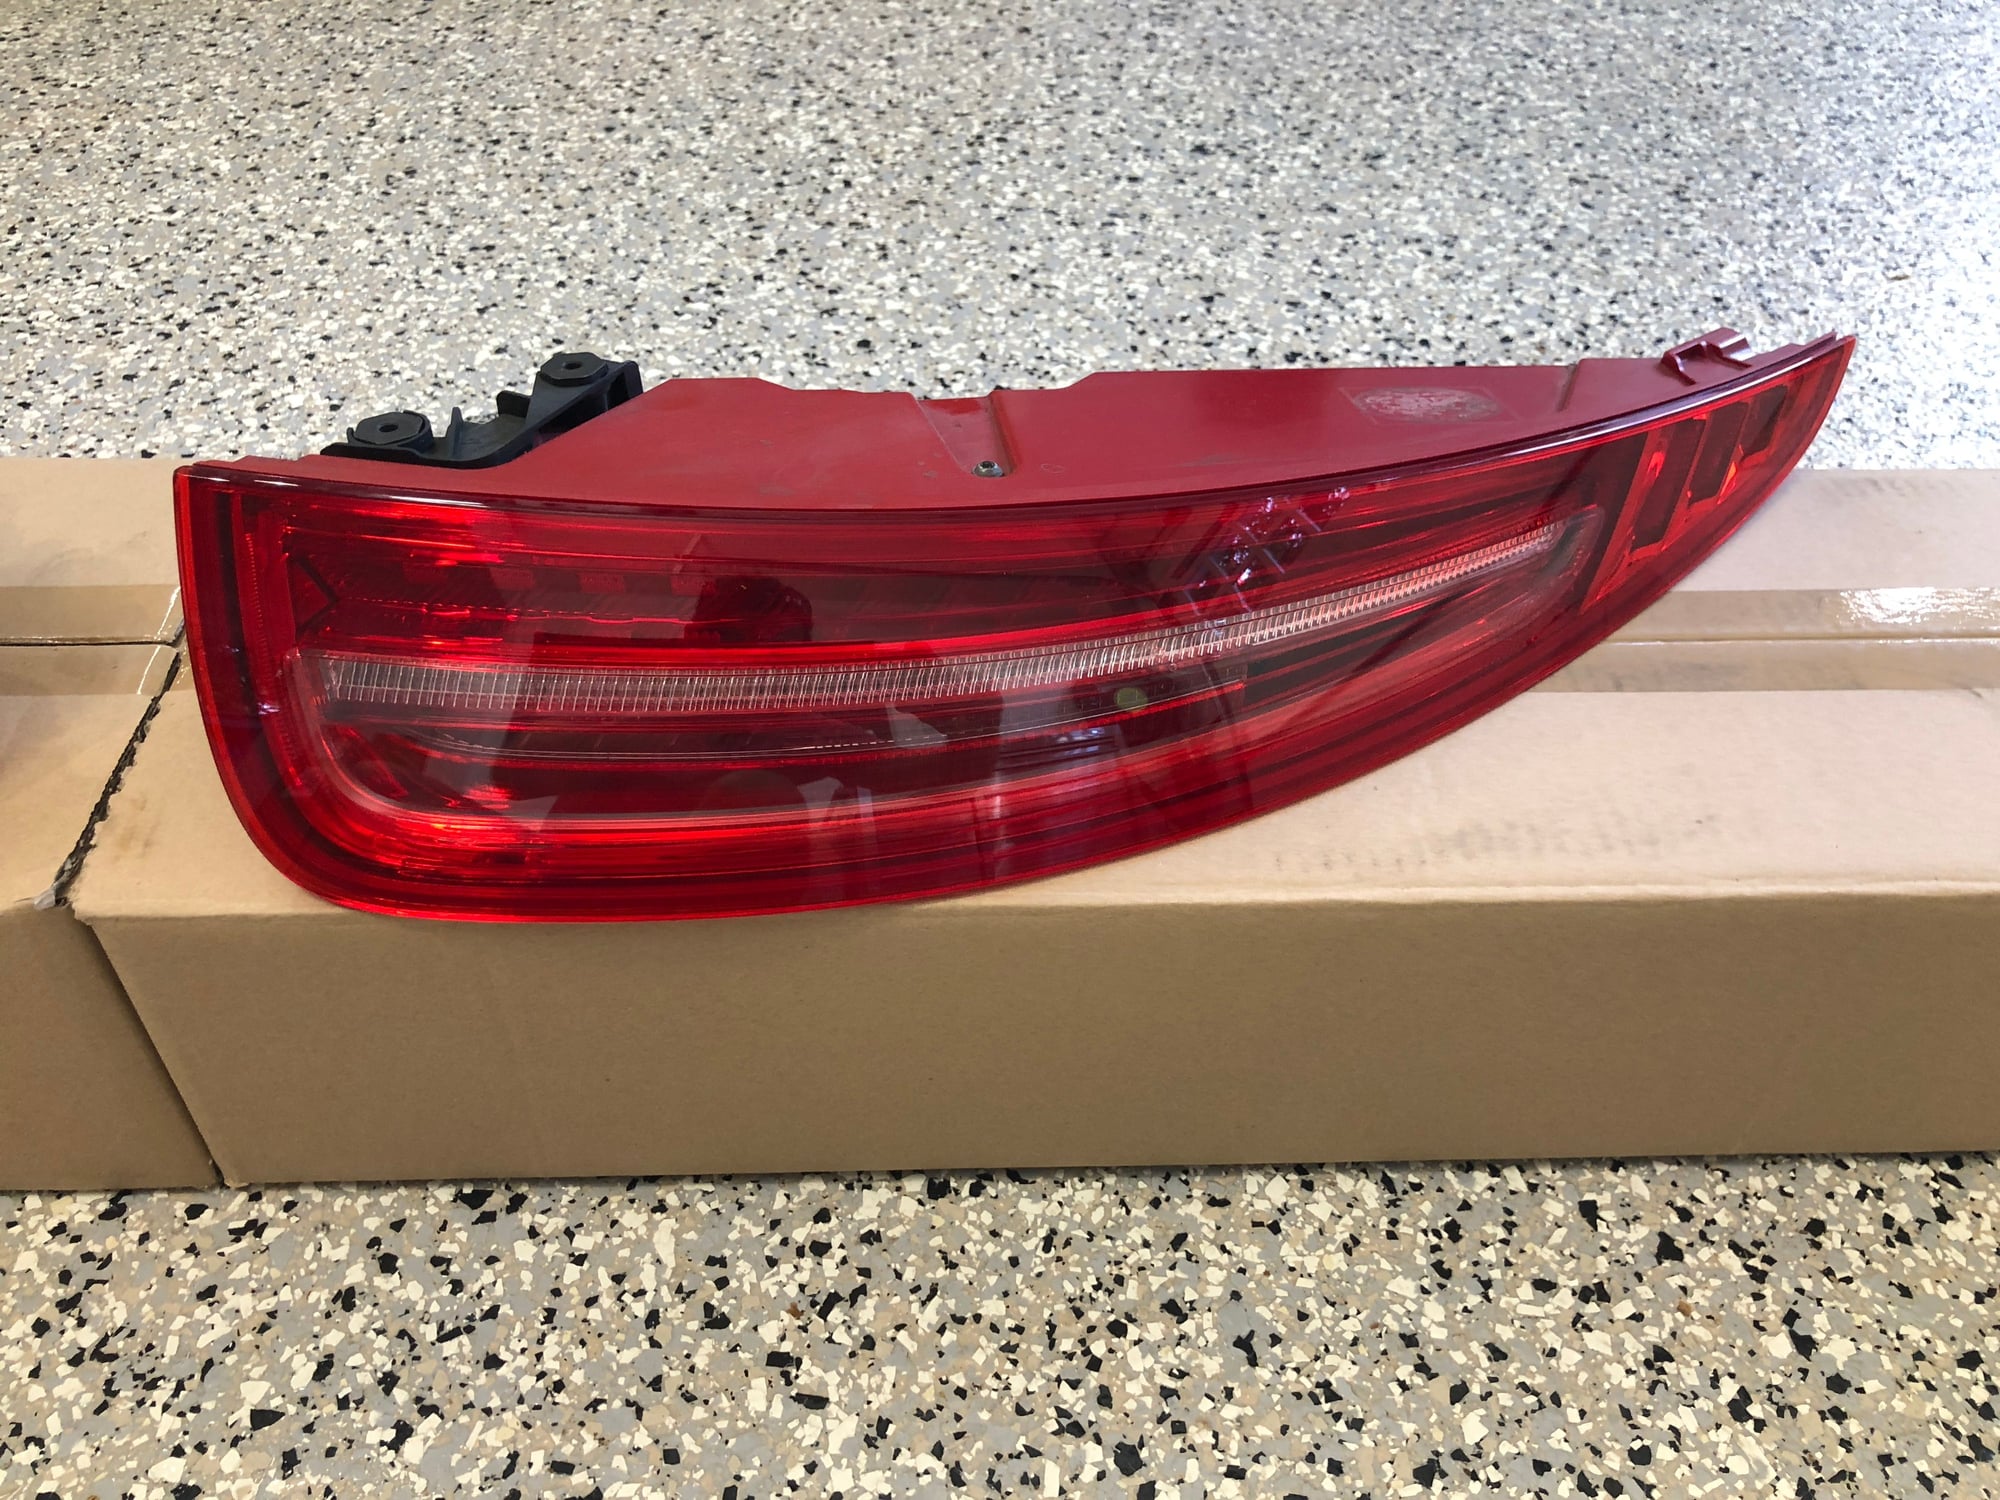 Lights - 991.1 Tail Lights - Red - Used - 2013 to 2016 Porsche 911 - San Francisco, CA 94111, United States